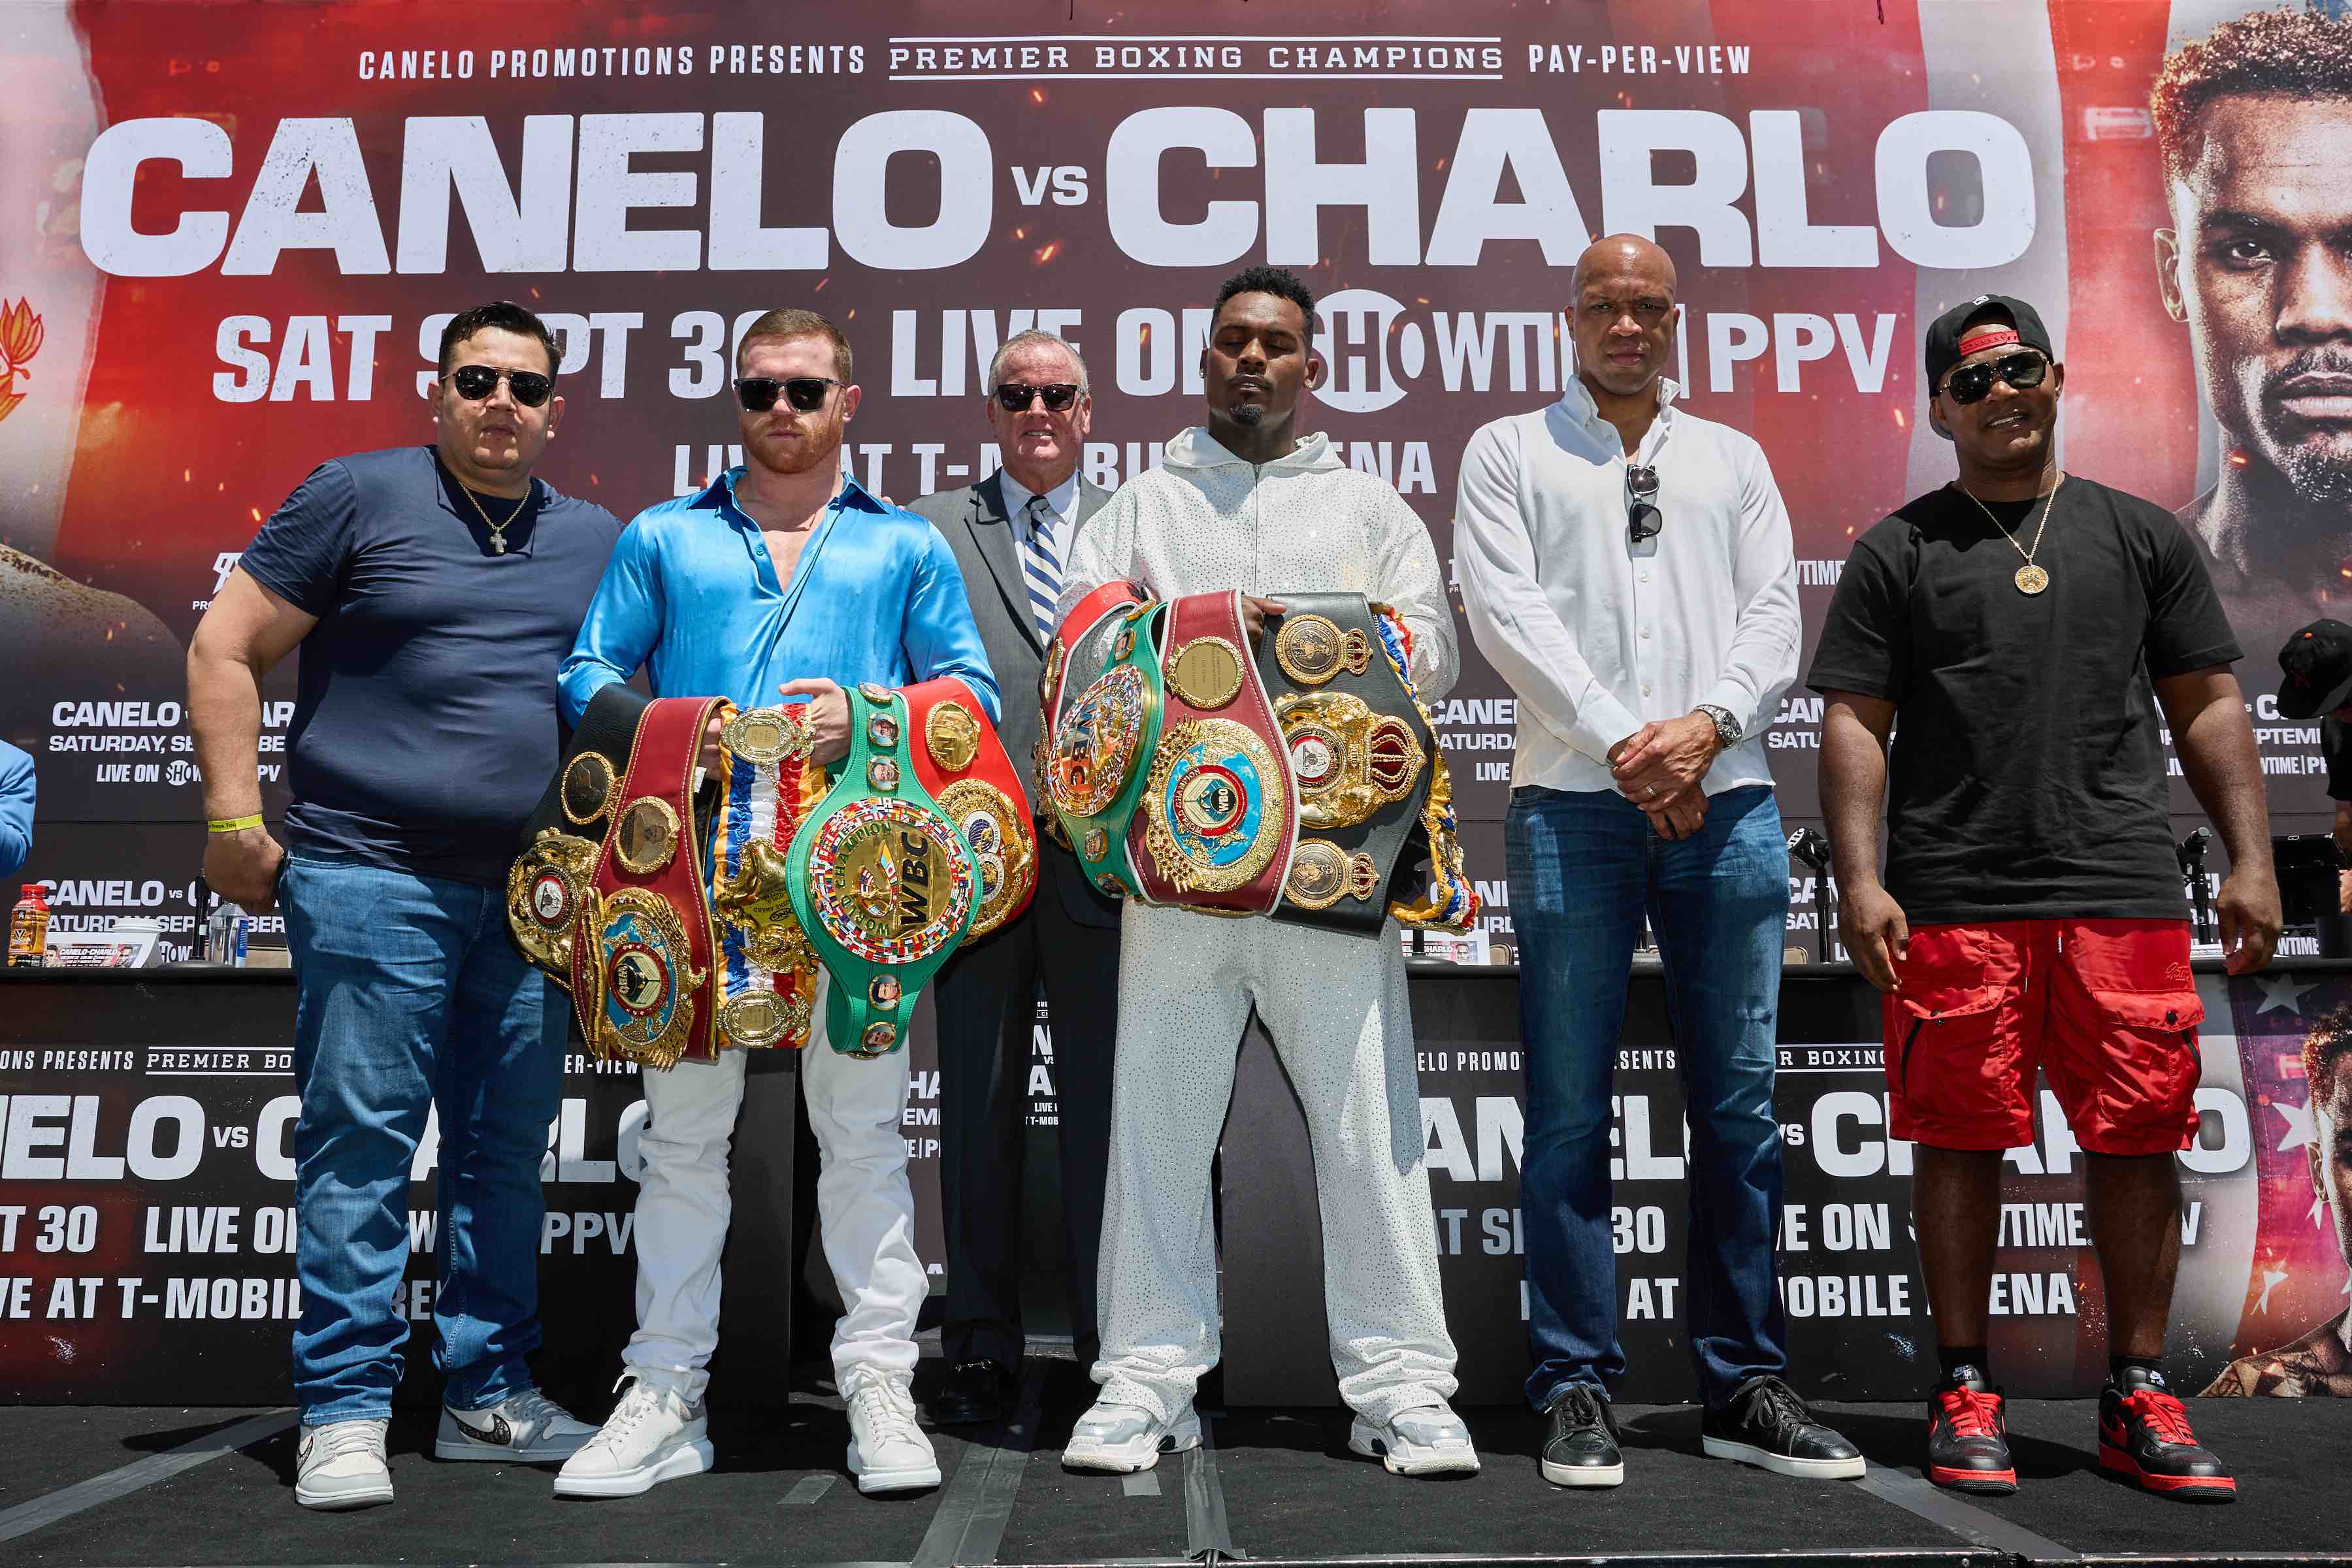 Organizers confirm 'stacked' card for Canelo-Charlo PPV